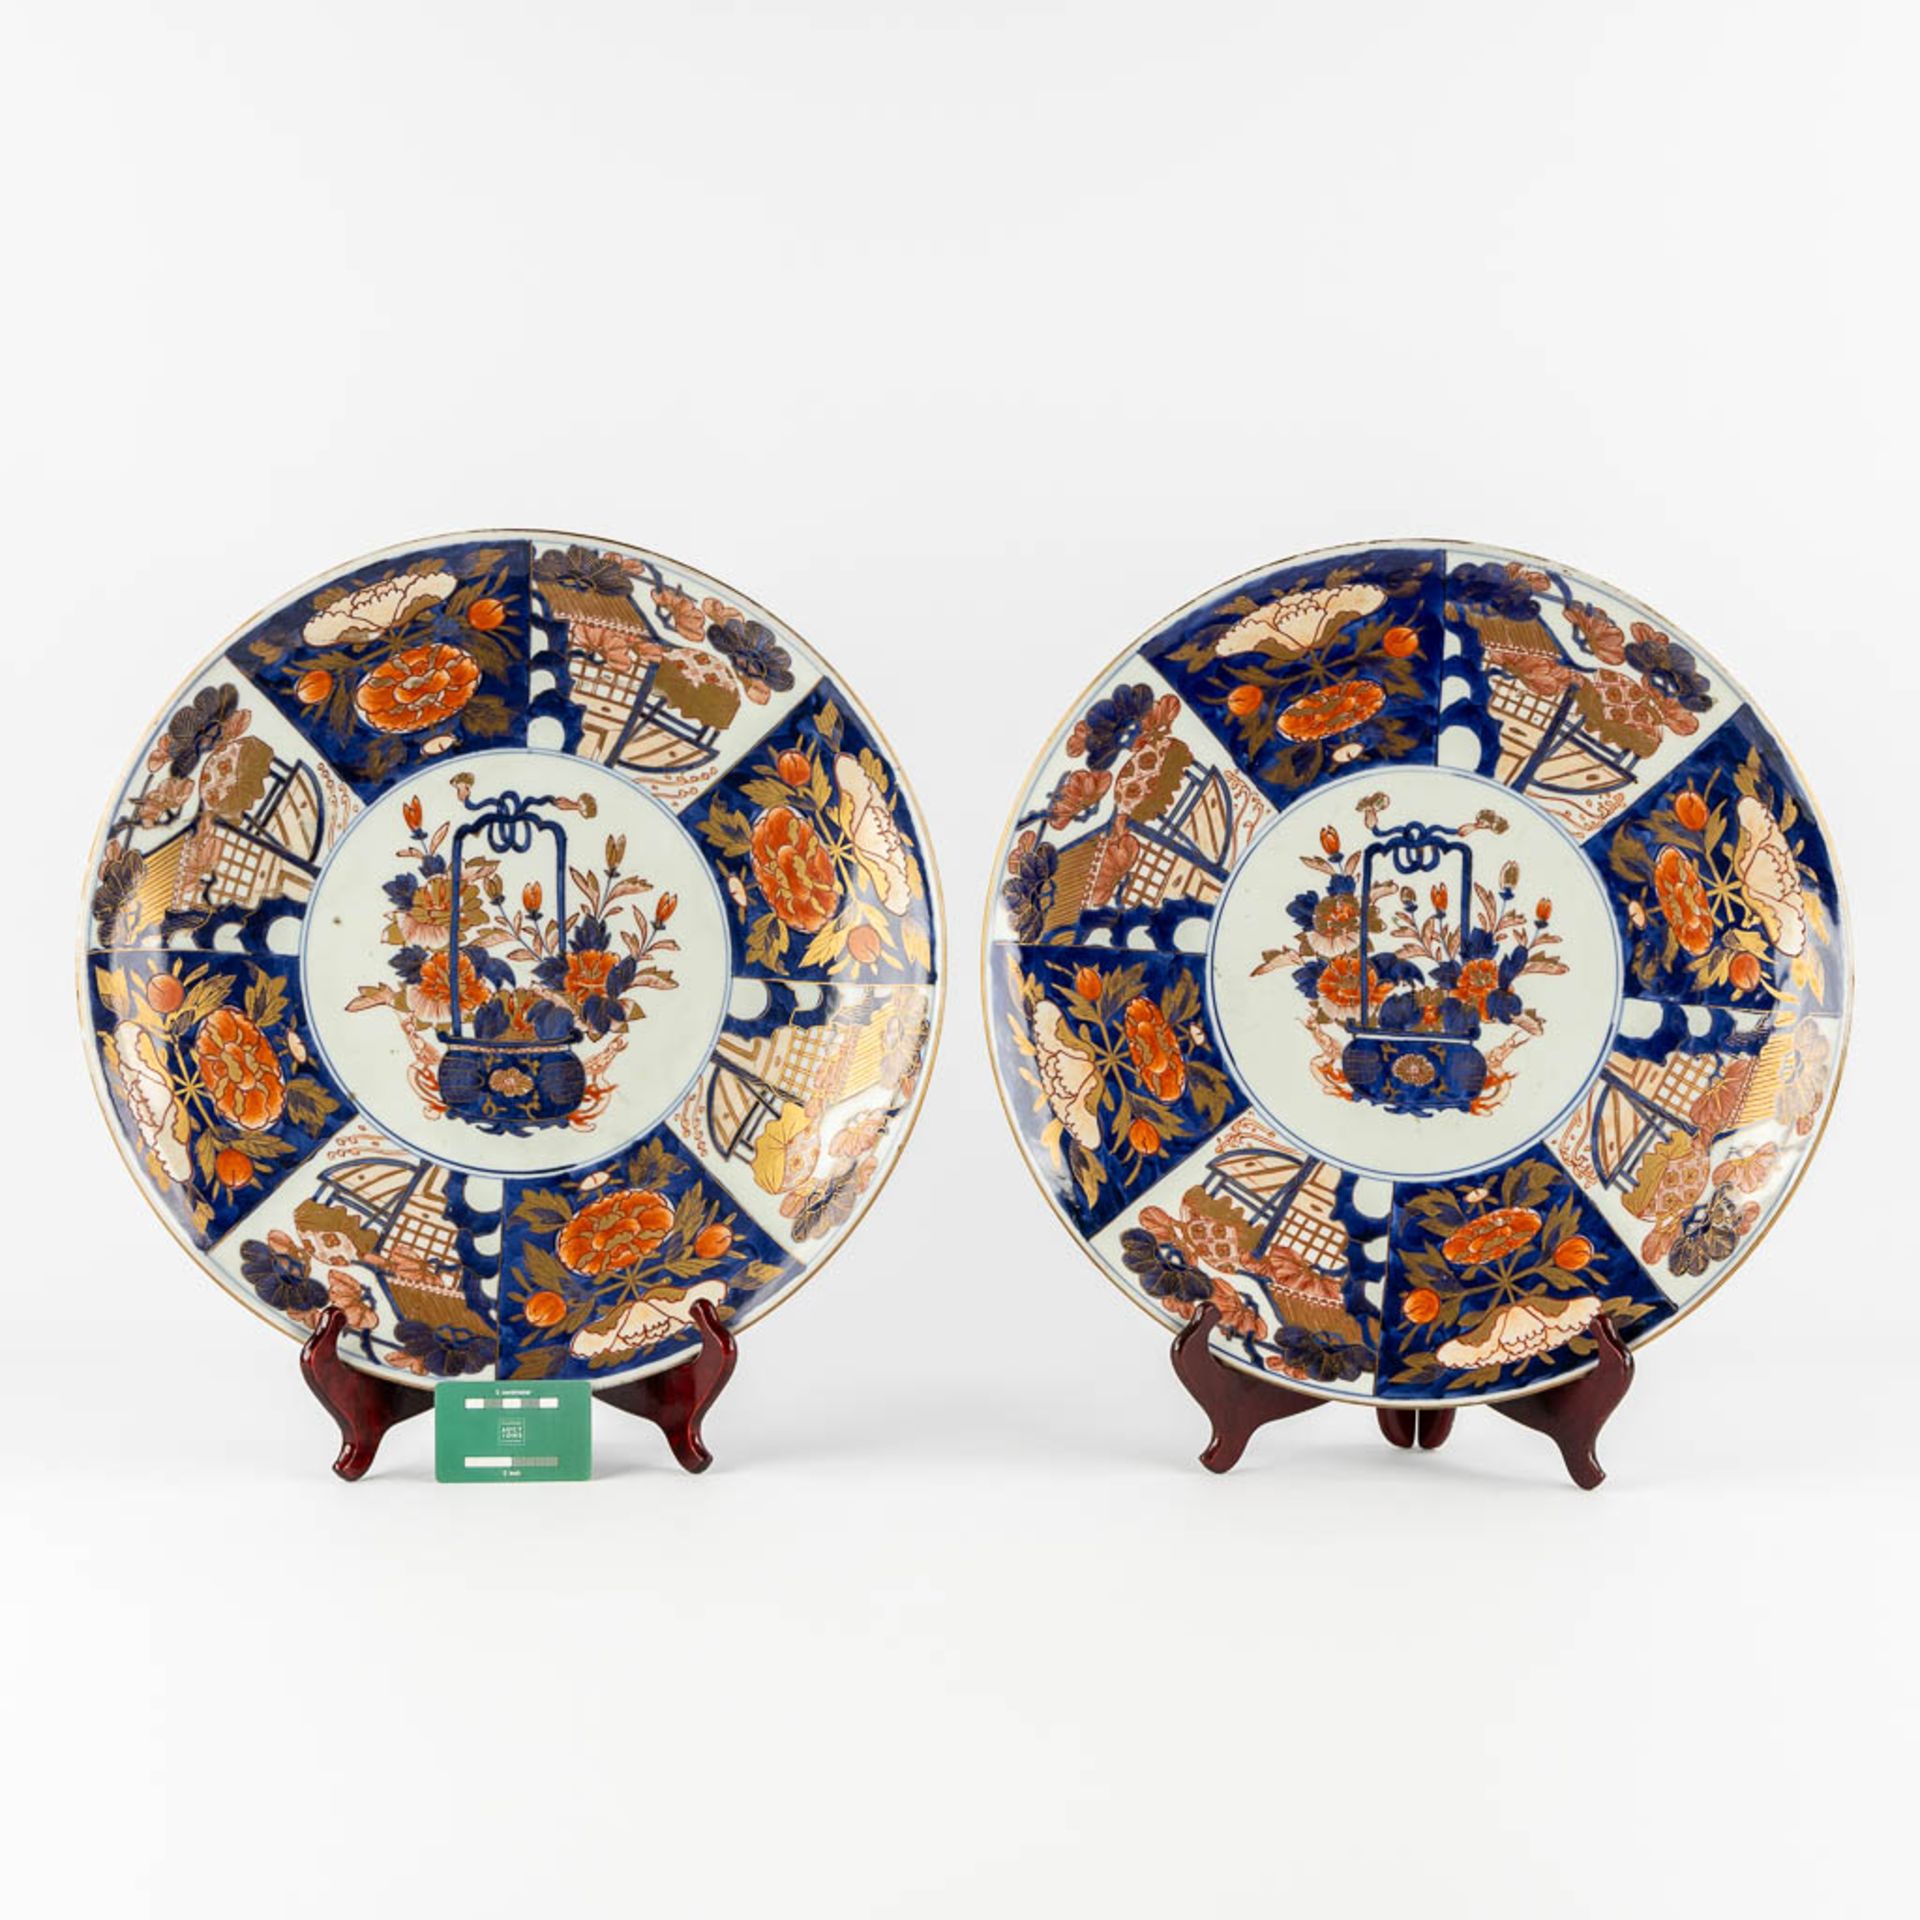 A pair of large Japanese Imari plates, 19th/20th C. (D:47 cm) - Image 2 of 13